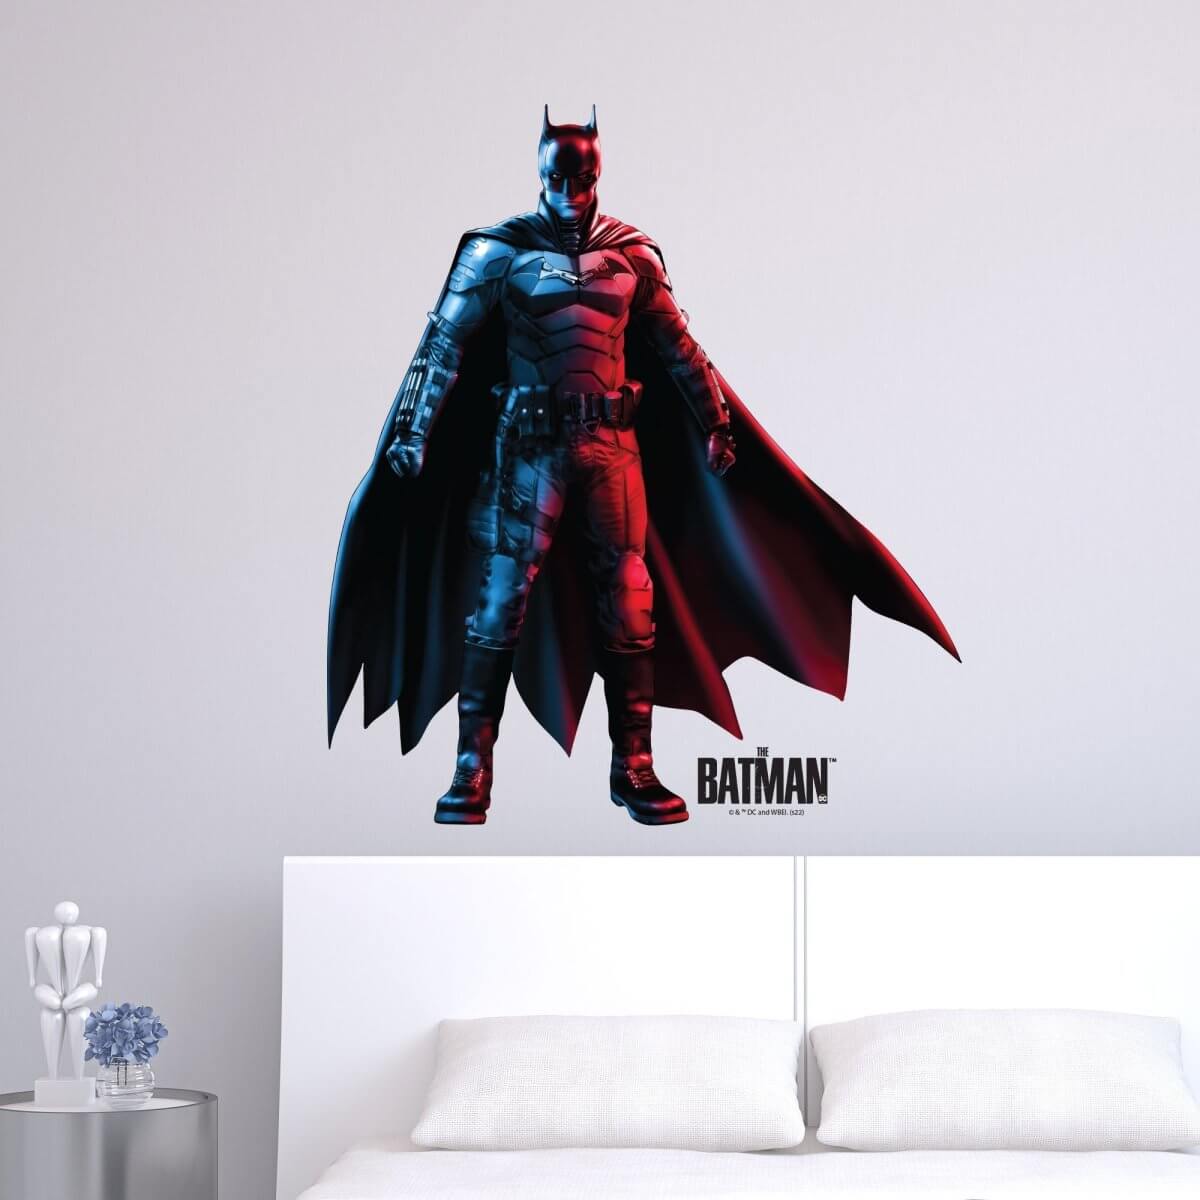 The Batman Neon Decal Armor 2022 Combat Licensed Wall